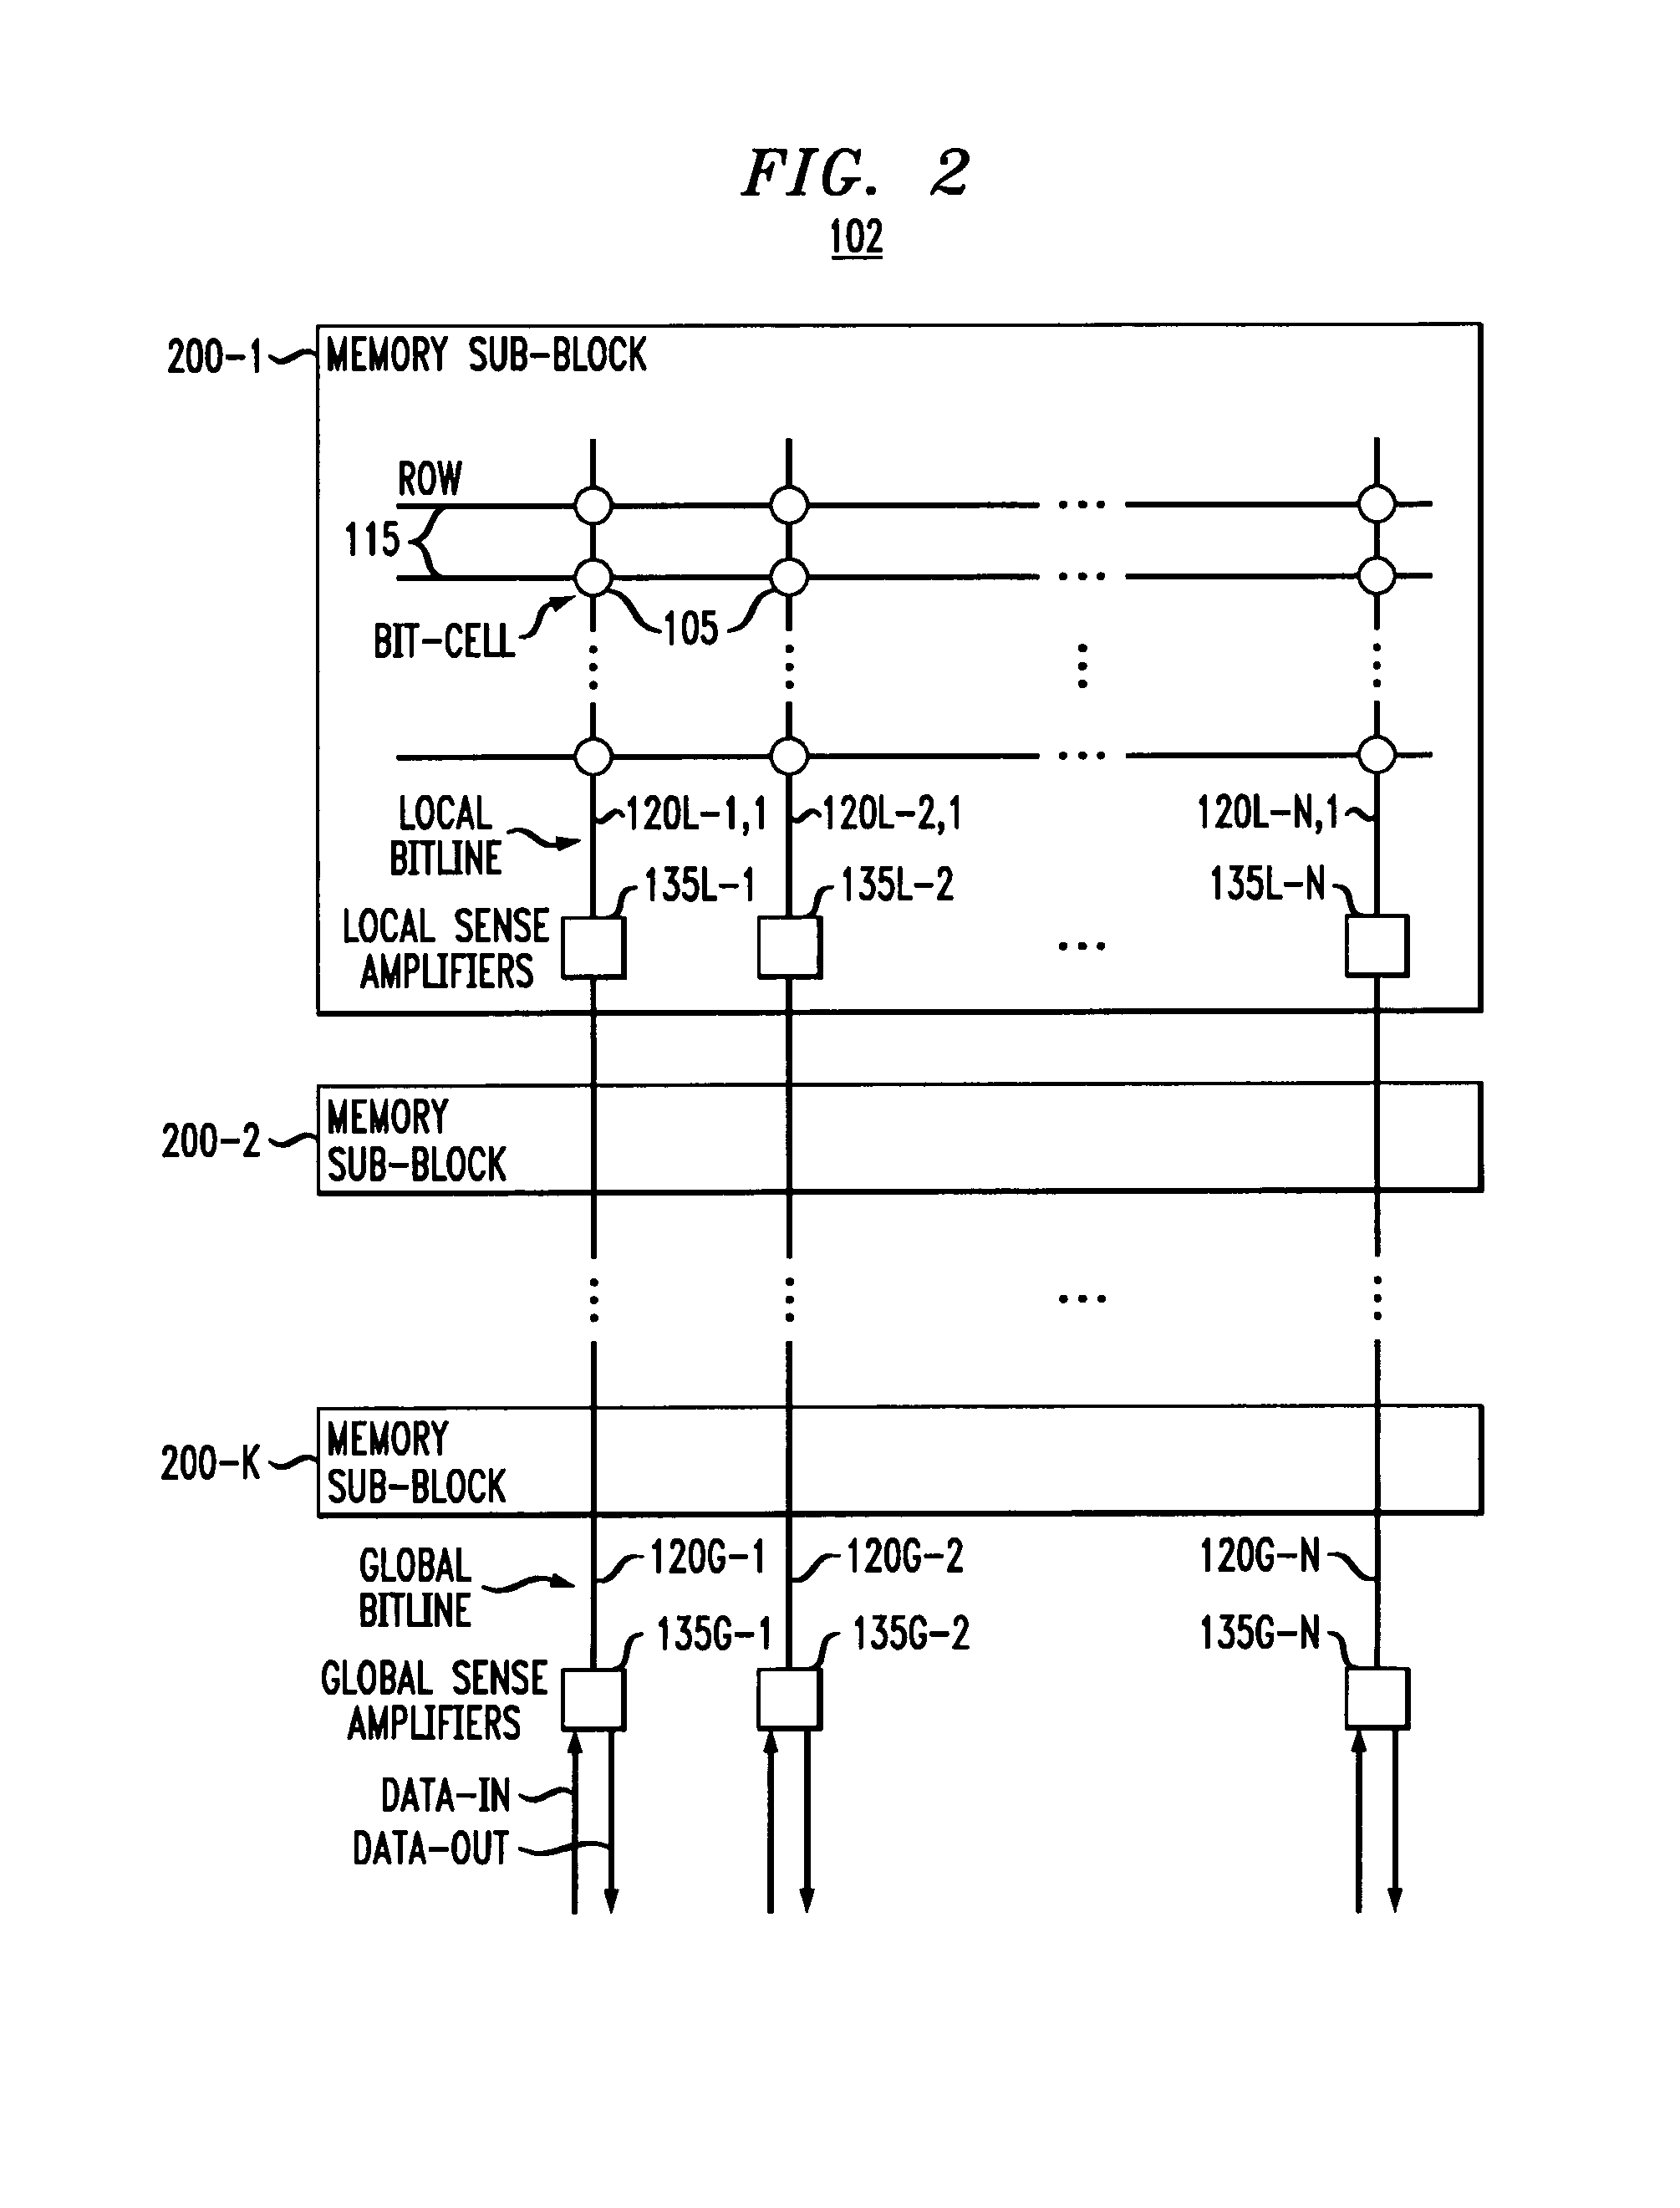 Memory device with error correction capability and efficient partial word write operation